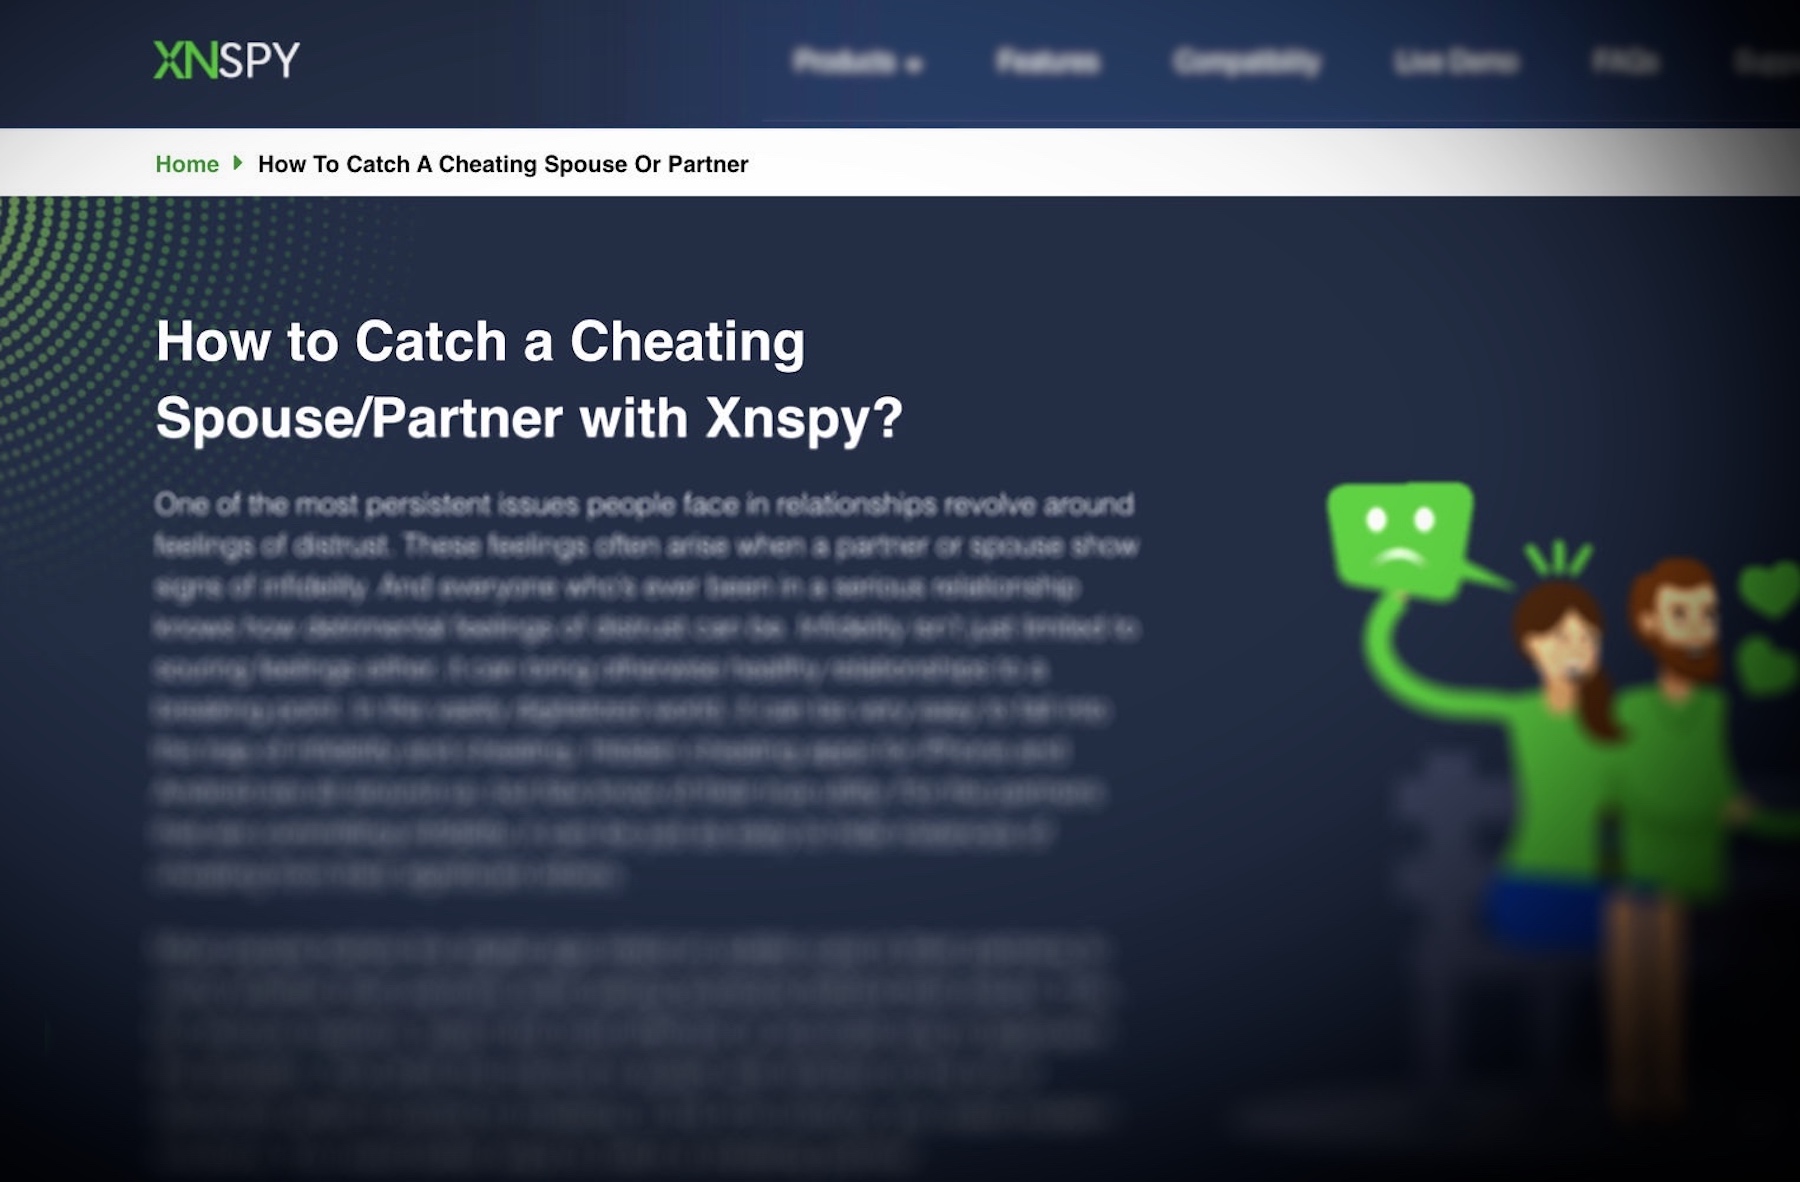 The Xnspy website advertises how its phone stalkerware can be used to spy on a person's spouse or partner.